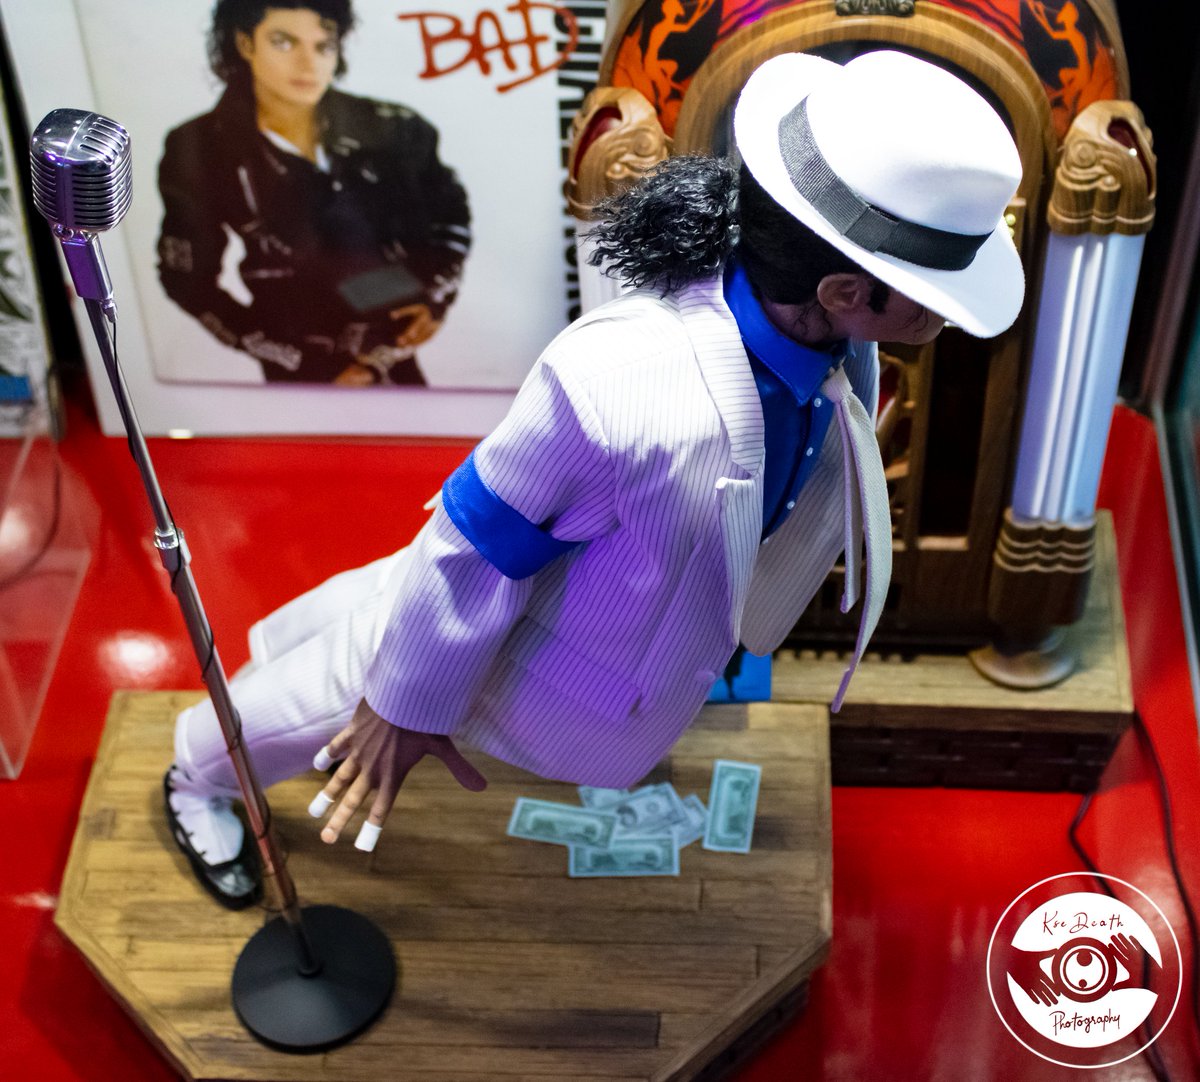 'You can't believe it, you can't conceive it
And you can't touch me, 'cause I'm untouchable
And I know you hate it, and you can't take it
You'll never break me, 'cause I'm unbreakable.'

📸 Canon EOS 2000D
🕴️Michael Jackson 1/3 PureArts Smooth Criminal Deluxe Statue